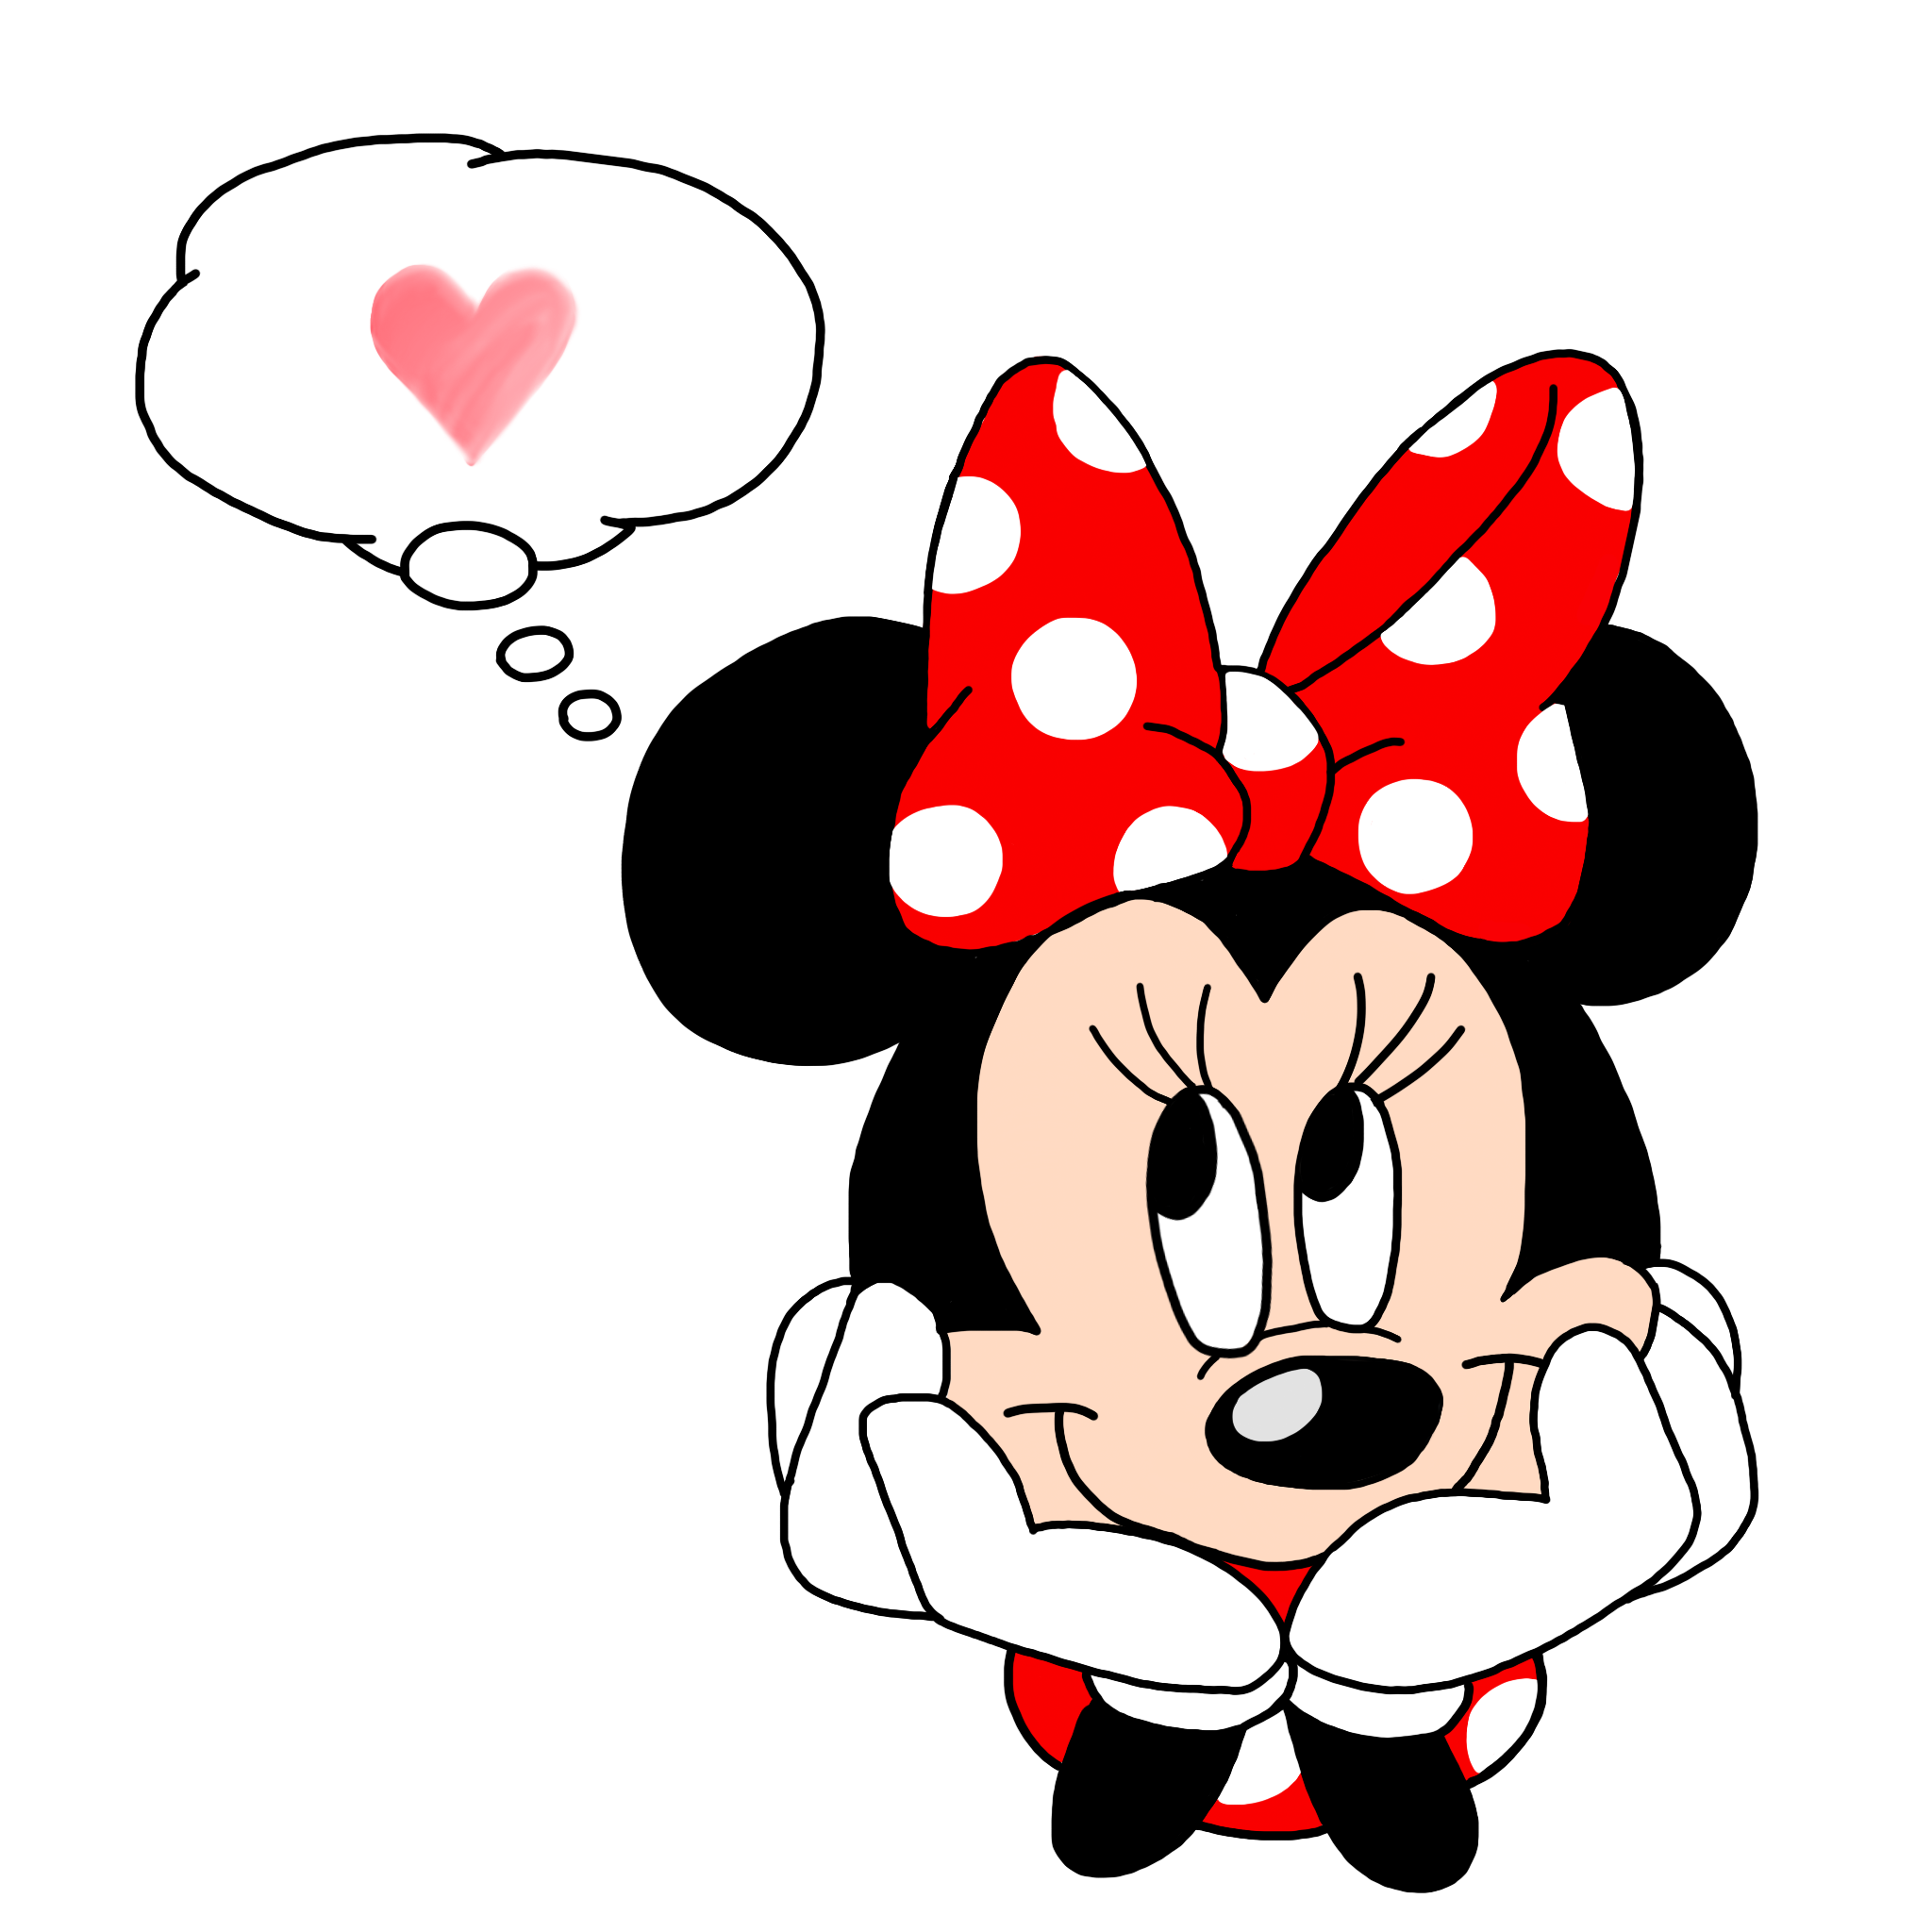 eyeglasses clipart minnie mouse